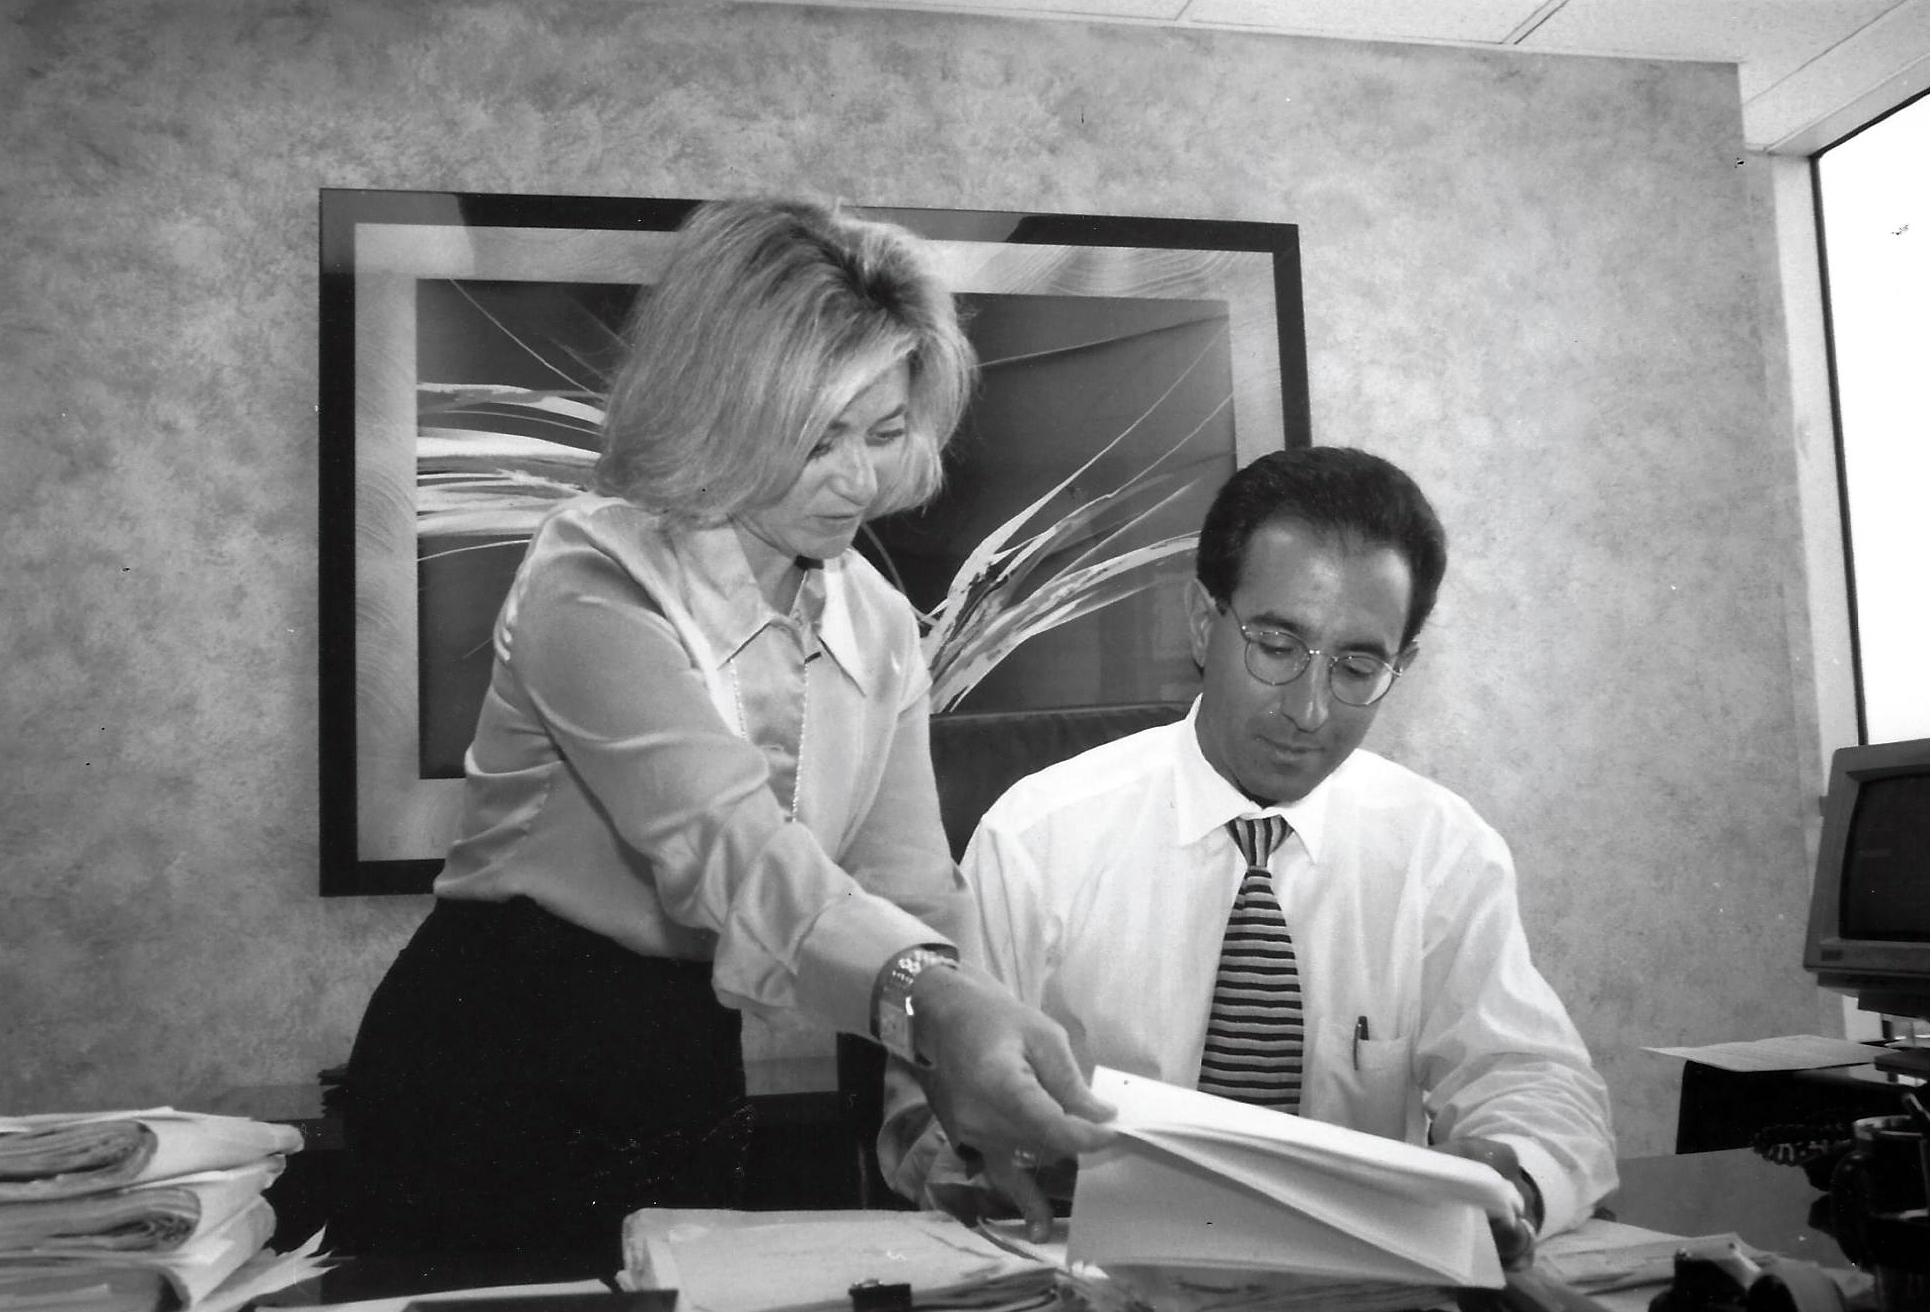 Nick & Lisa working on debt collections case in the 1990's